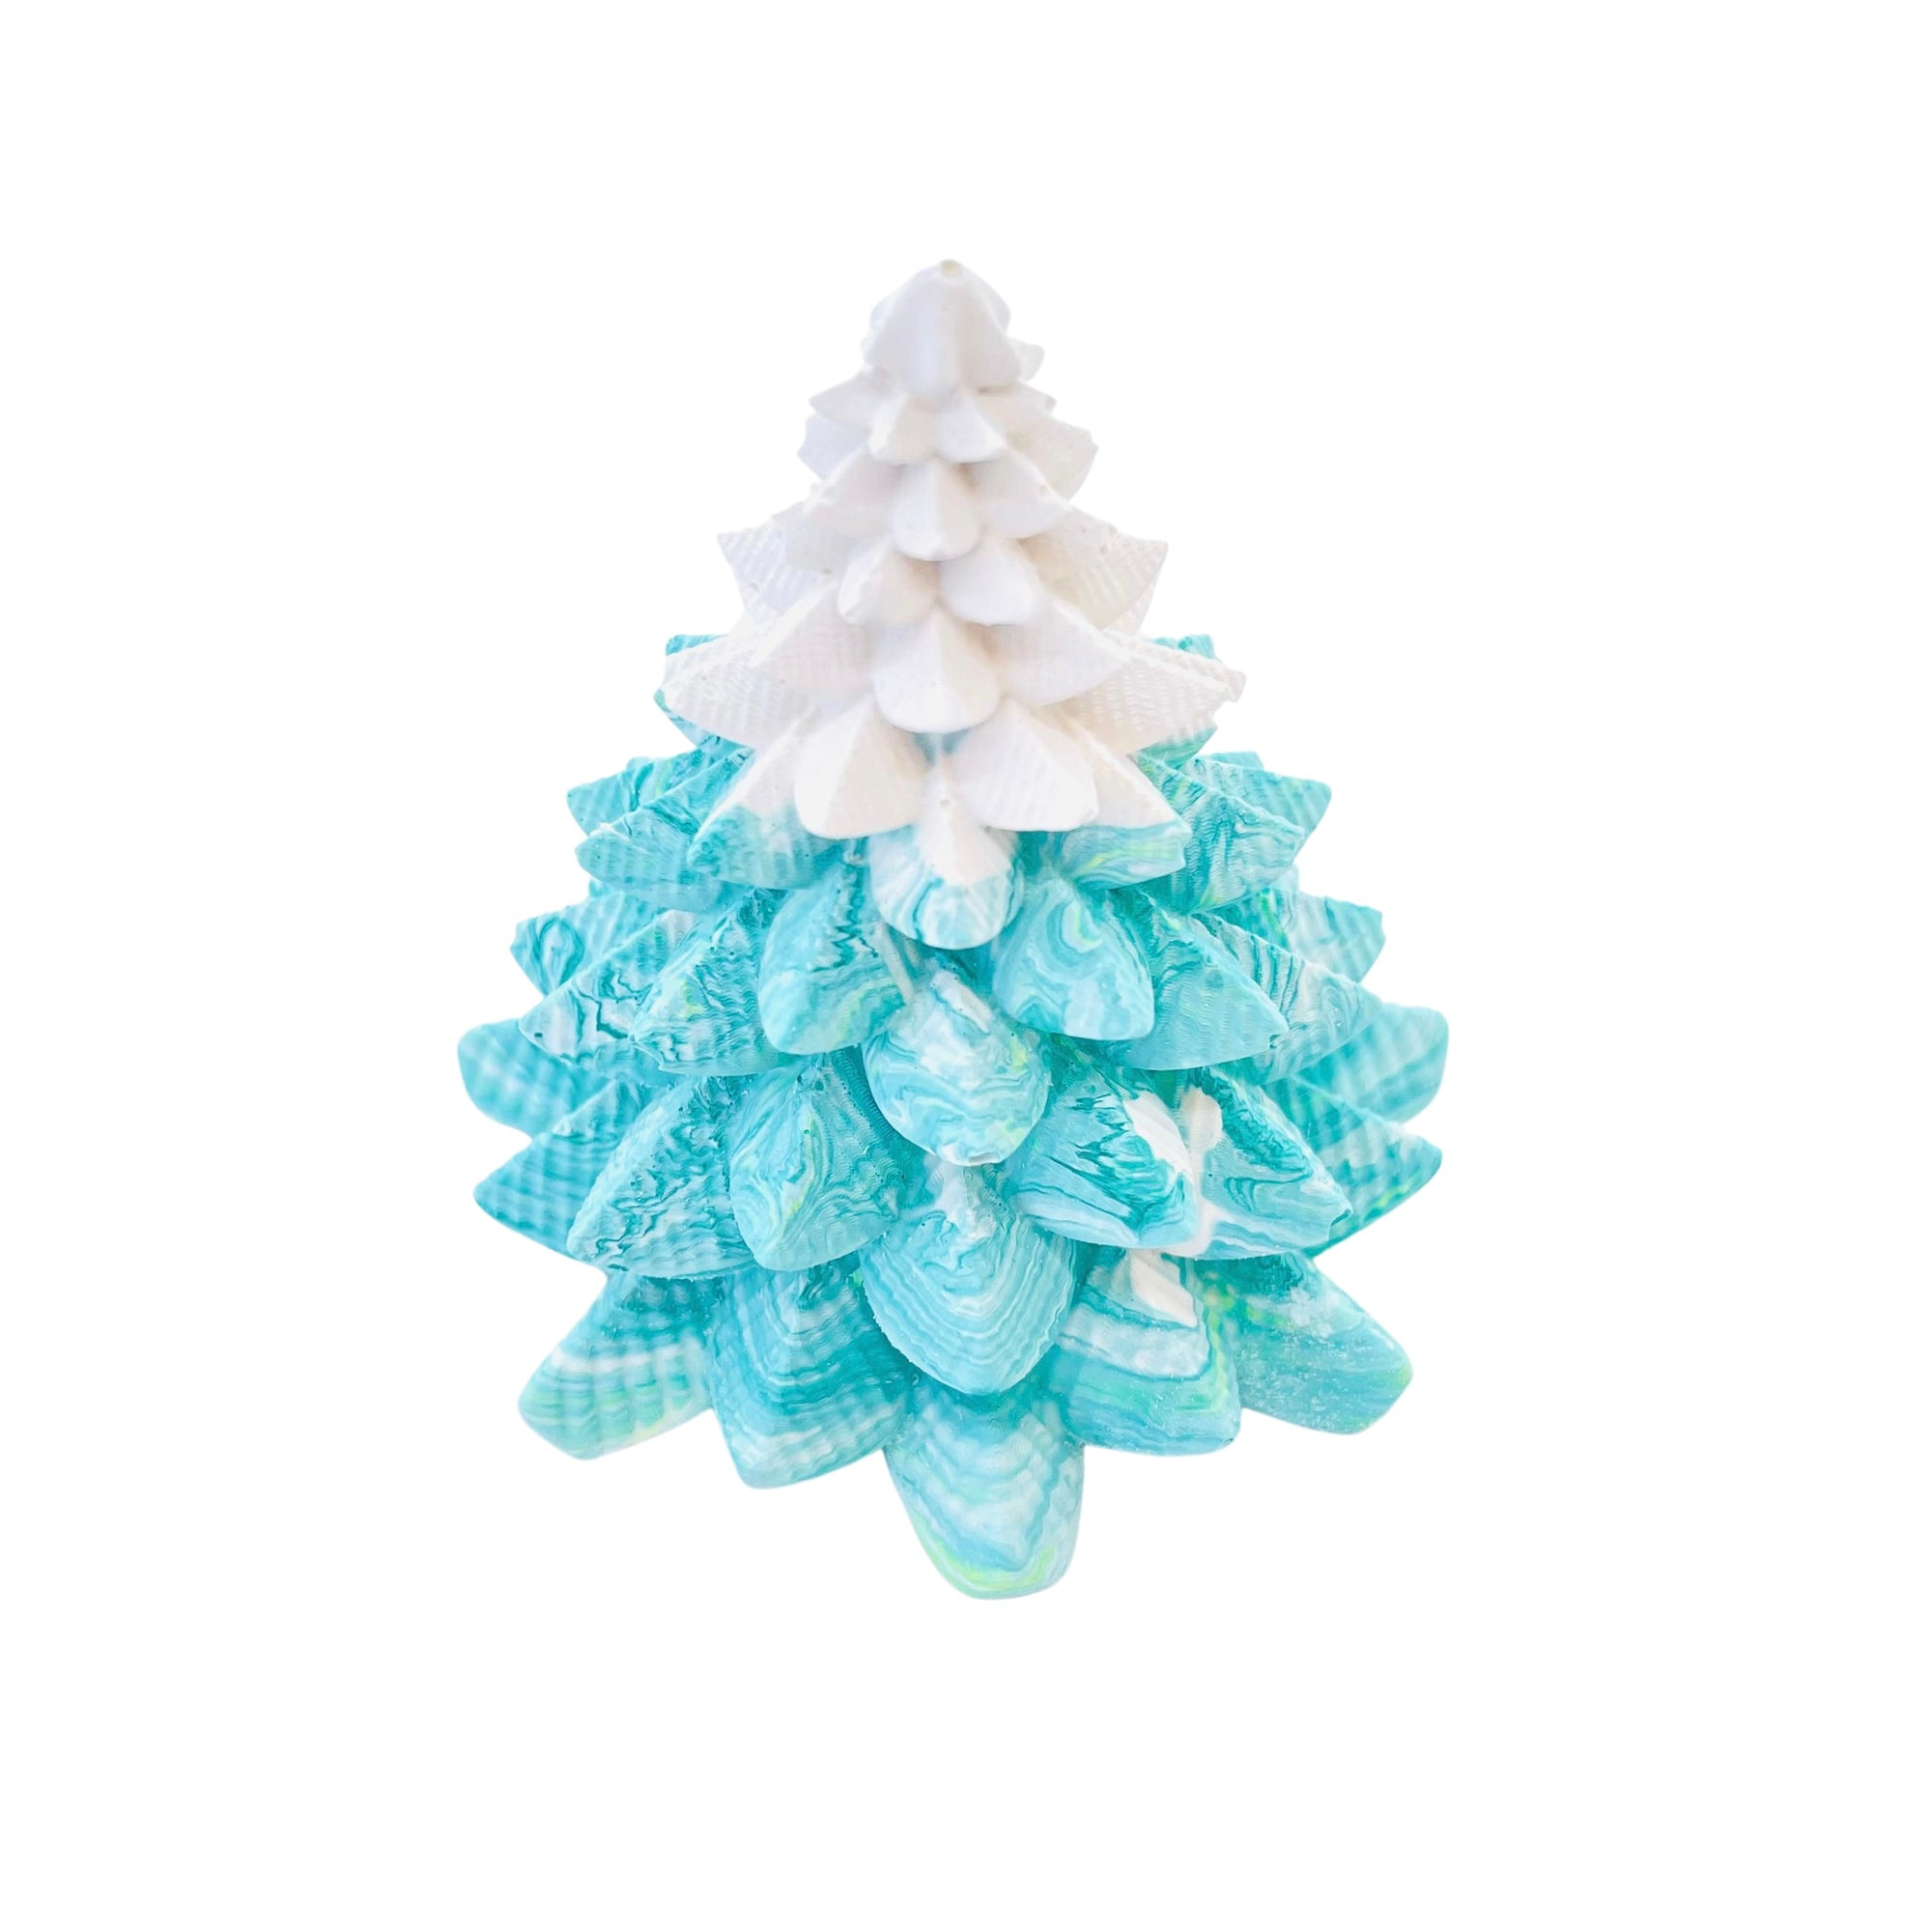 A small Jesmonite Christmas tree measuring 8.5cm tall and 7.5cm wide marbled with turquoise and white  pigment.